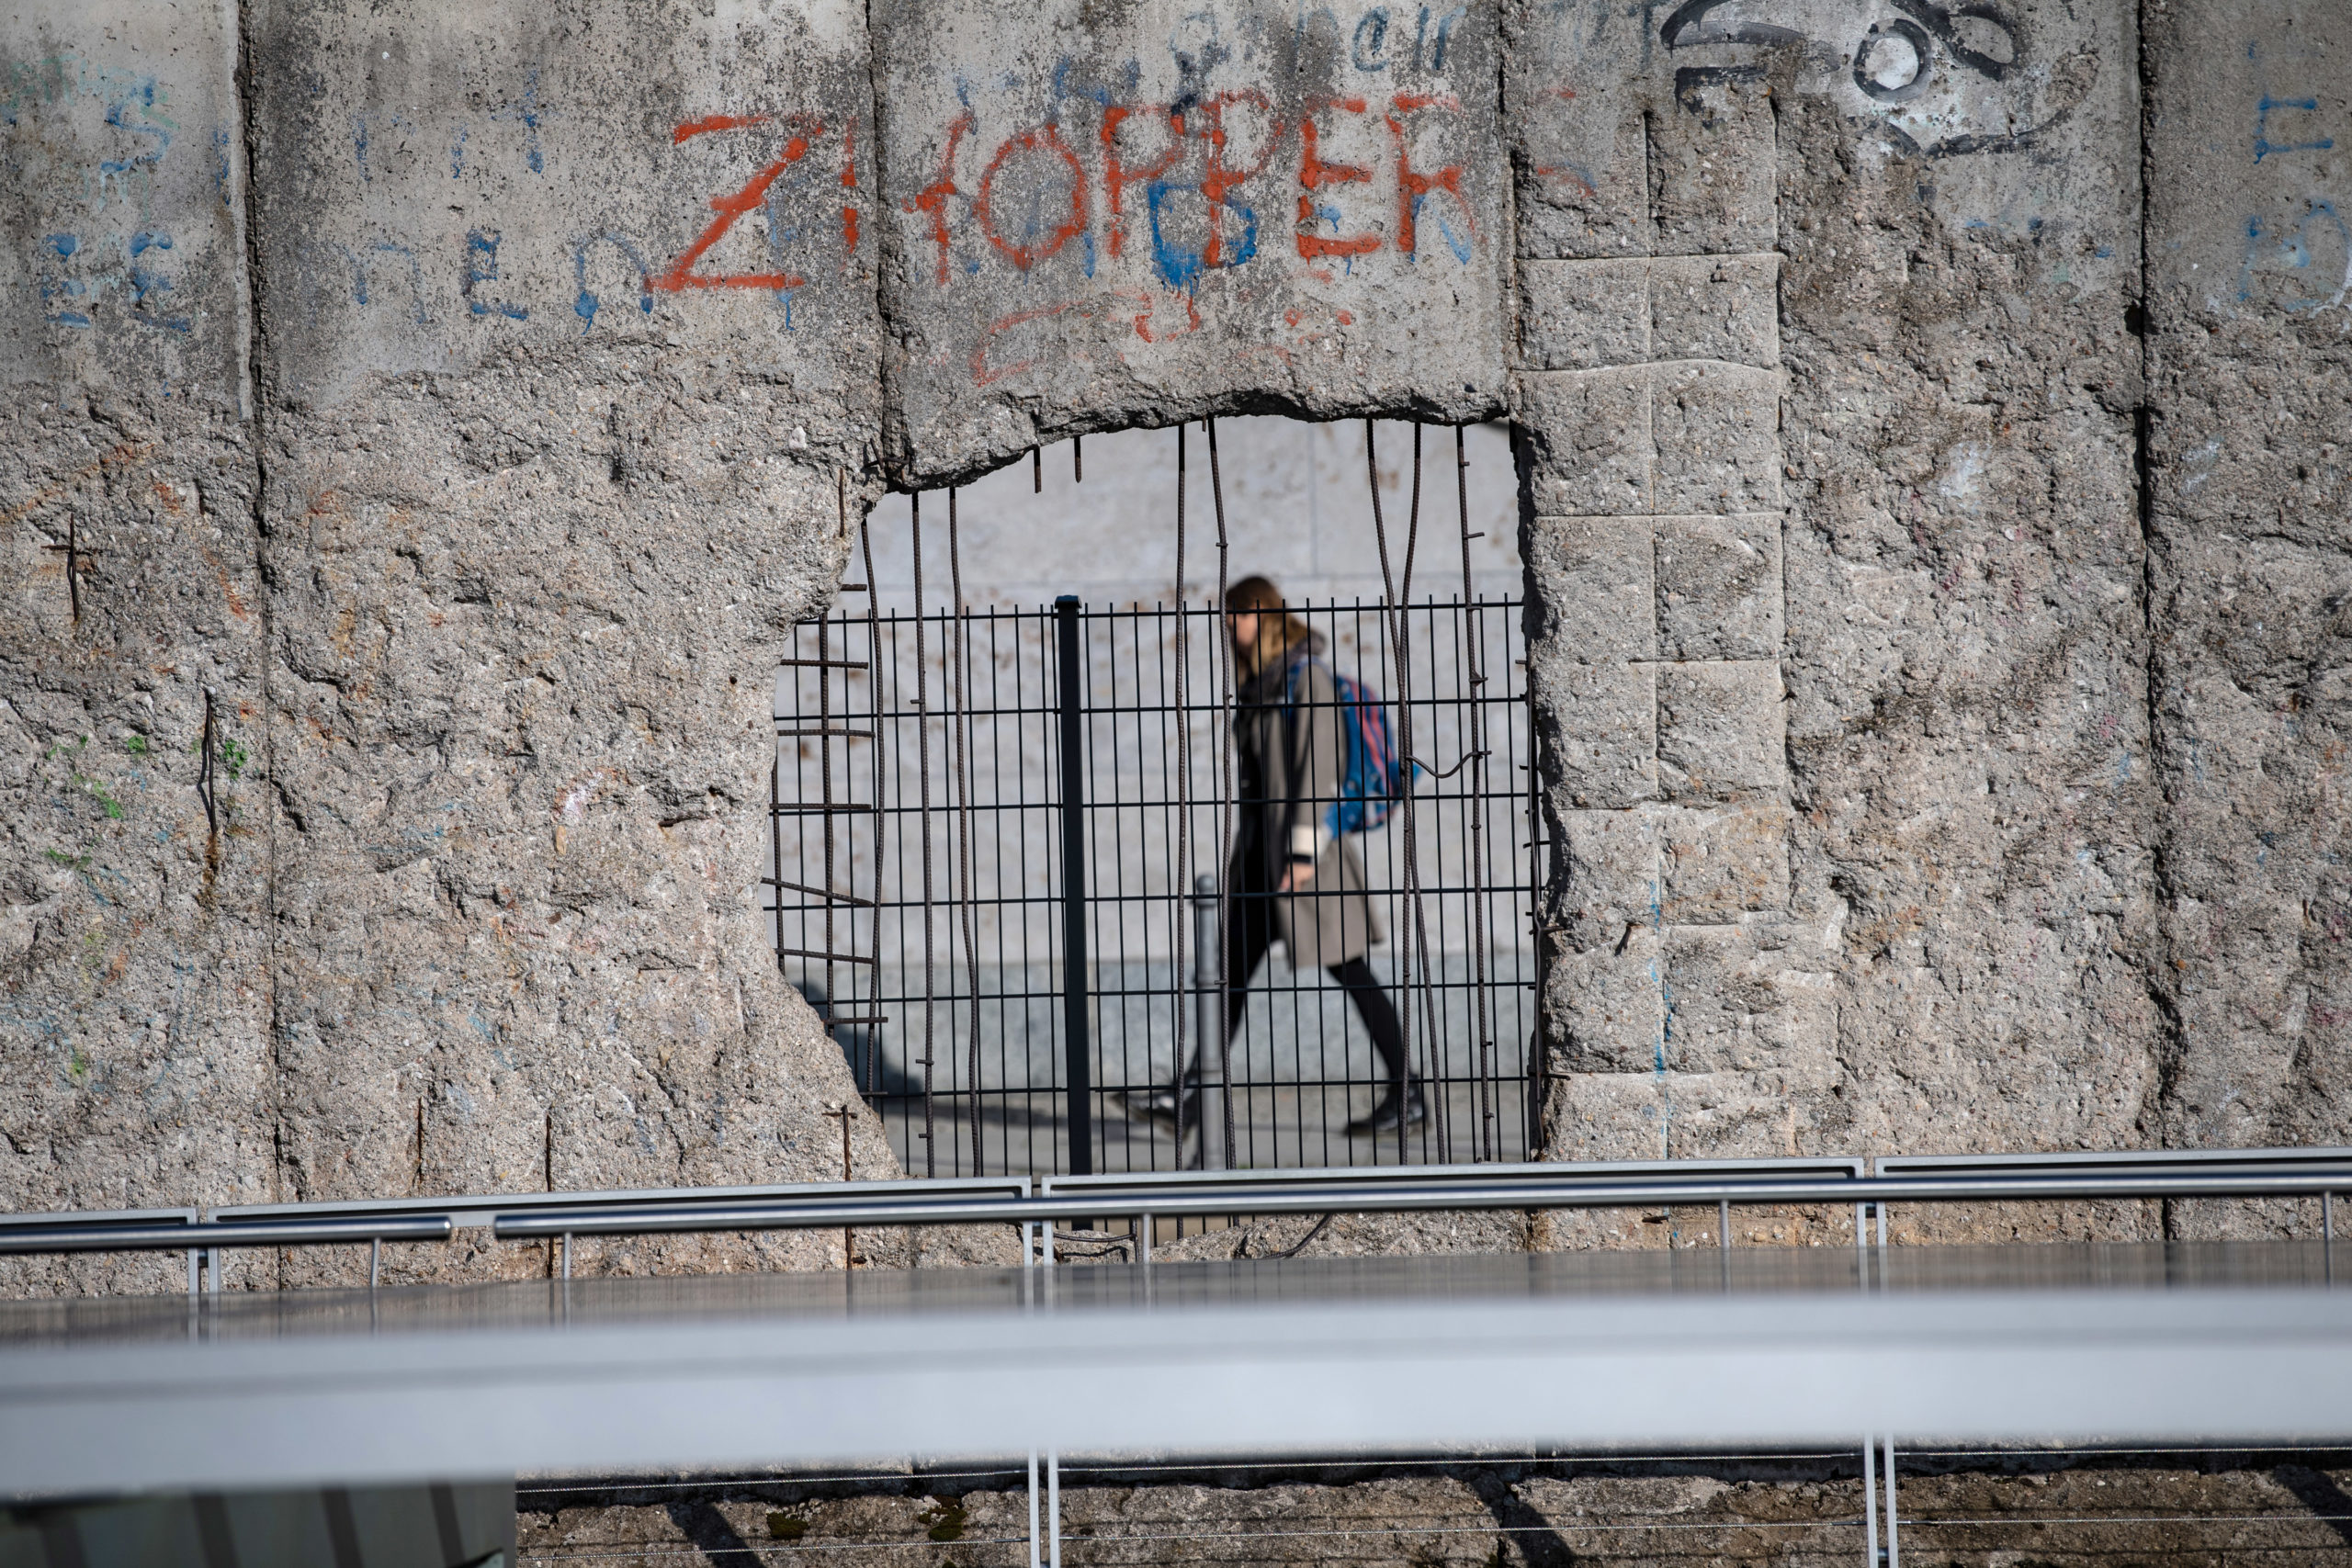 Key events from the fall of the Berlin Wall to German unity